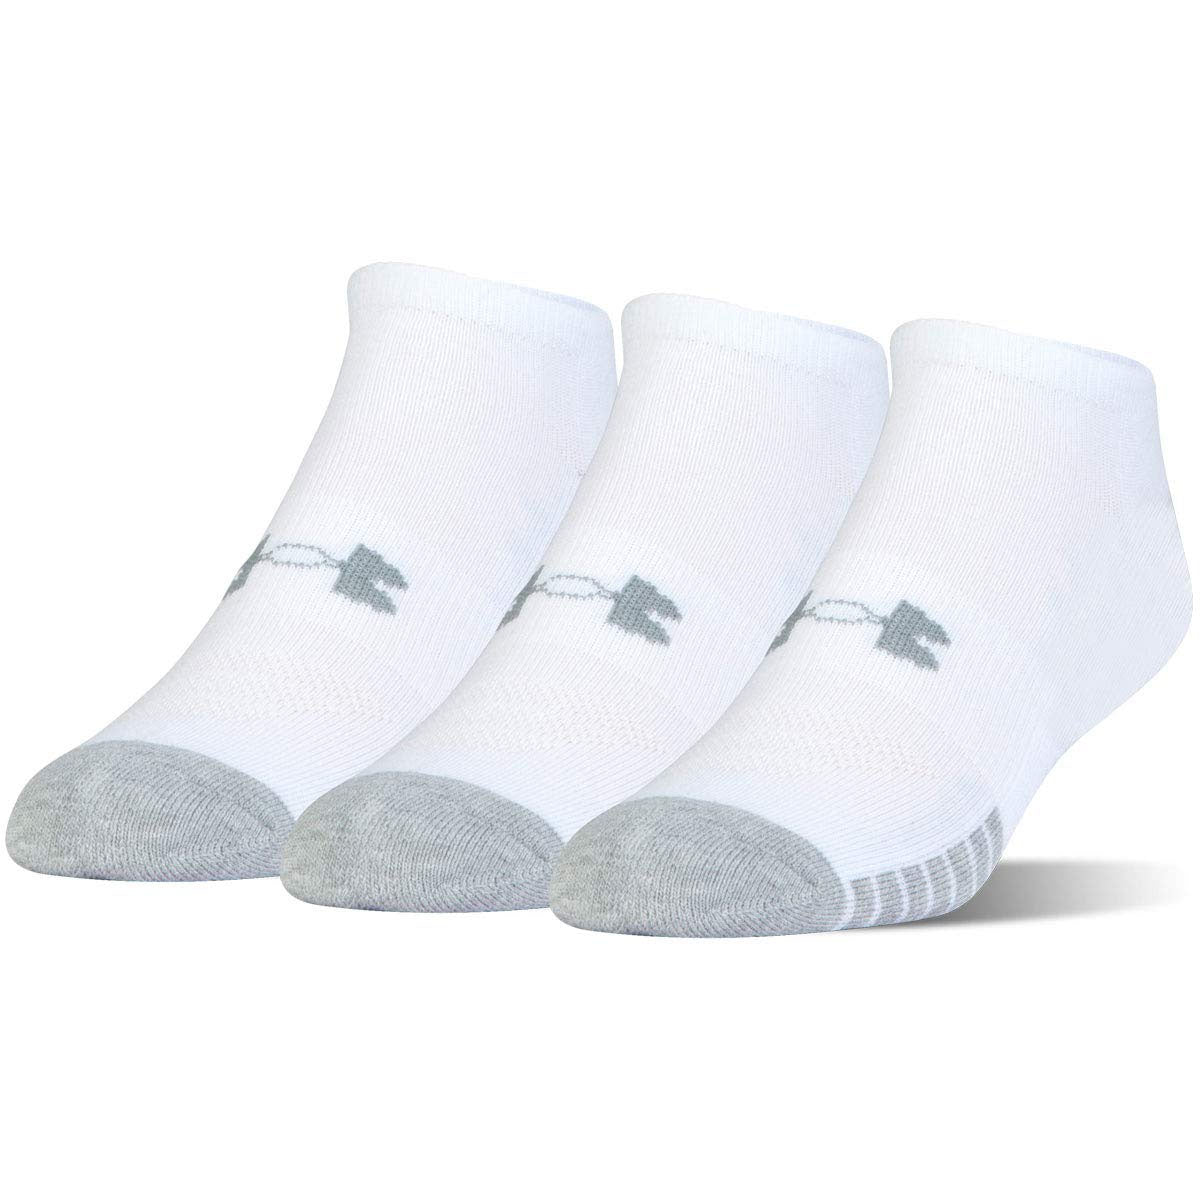 Under Armour No Show Adult Socks (3 Pack)